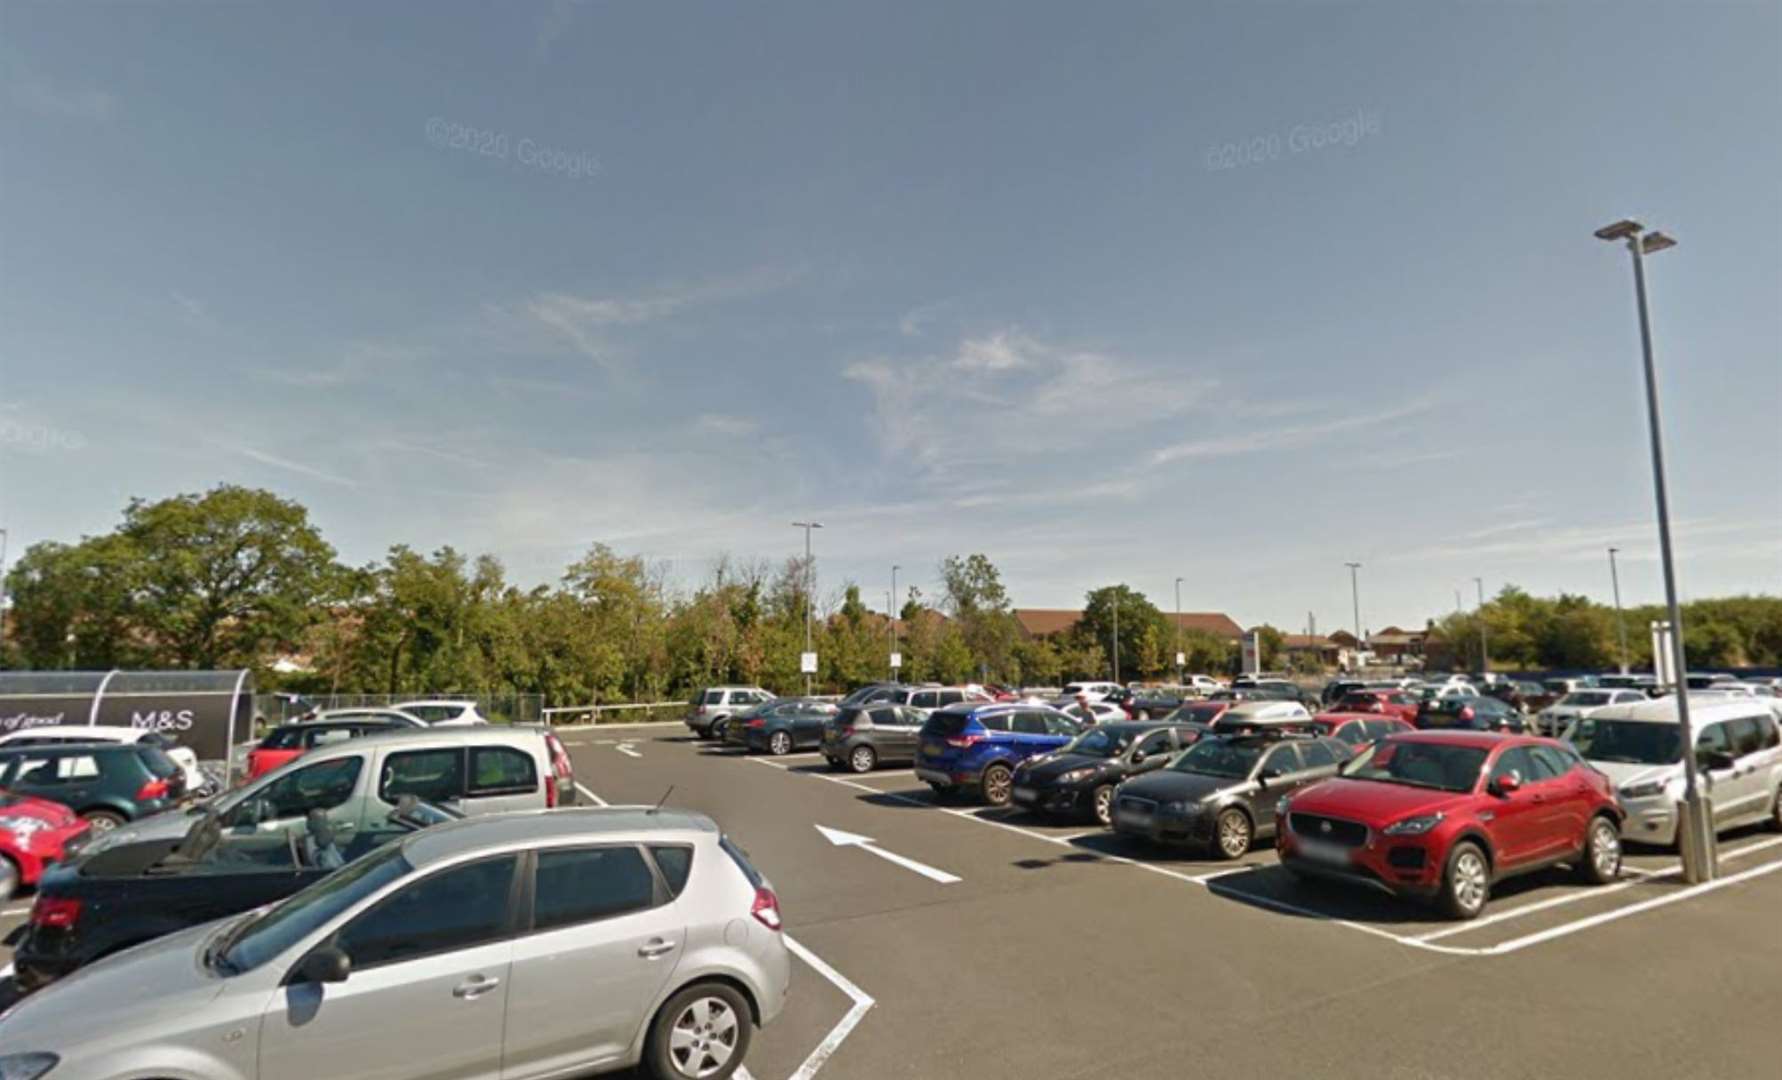 Customers to Prospect Way Retail Park have been landed with a fine after visiting twice in the space of four hours. Picture: Google